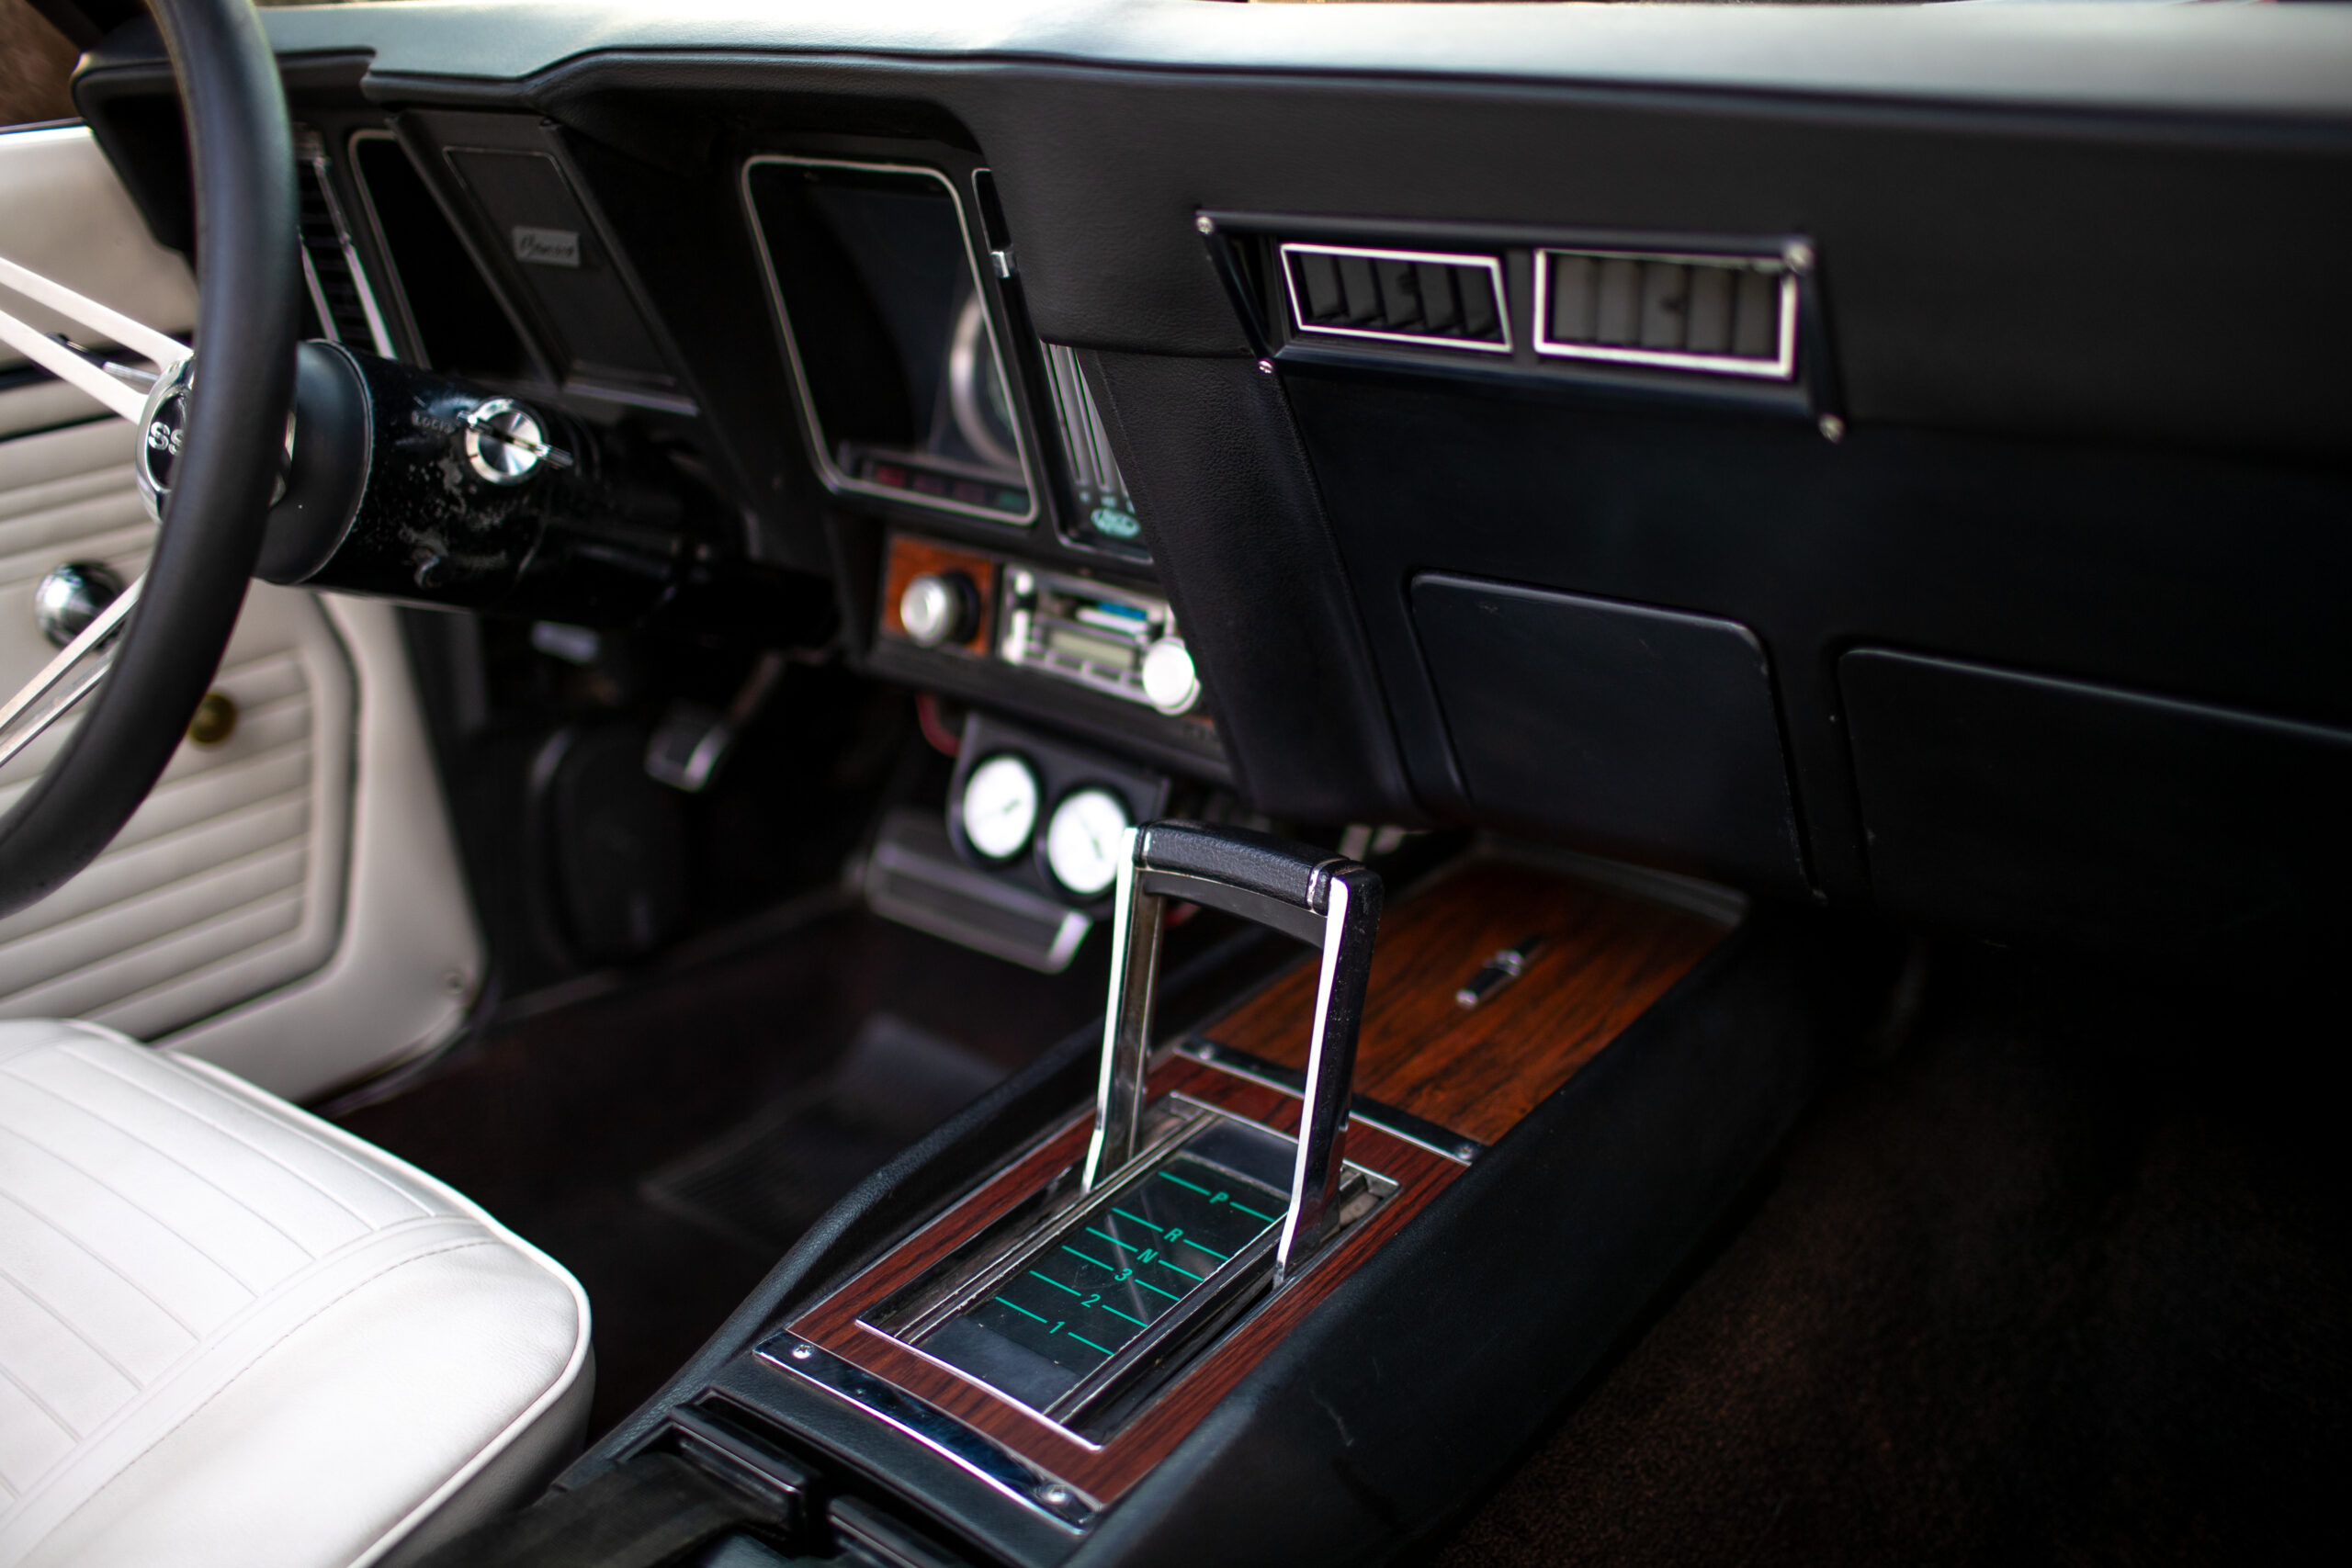 Interior view of a car showcasing the steering wheel, dashboard controls, and a center console featuring a vintage gear shift with wooden trim.